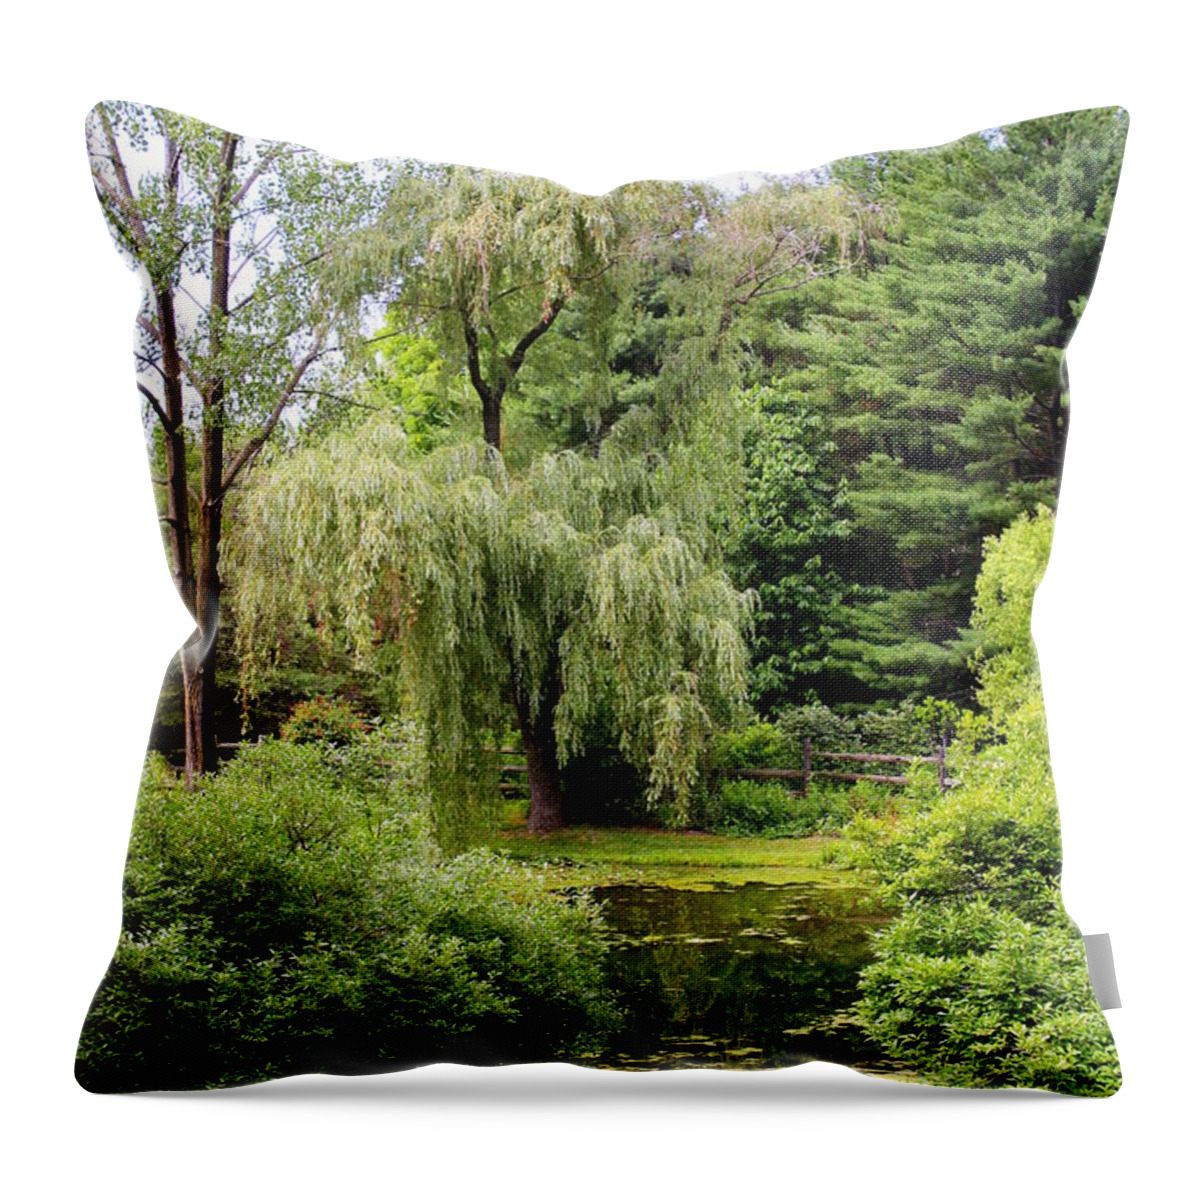 Foilage Throw Pillow featuring the photograph Lazy Pond by Deborah Crew-Johnson